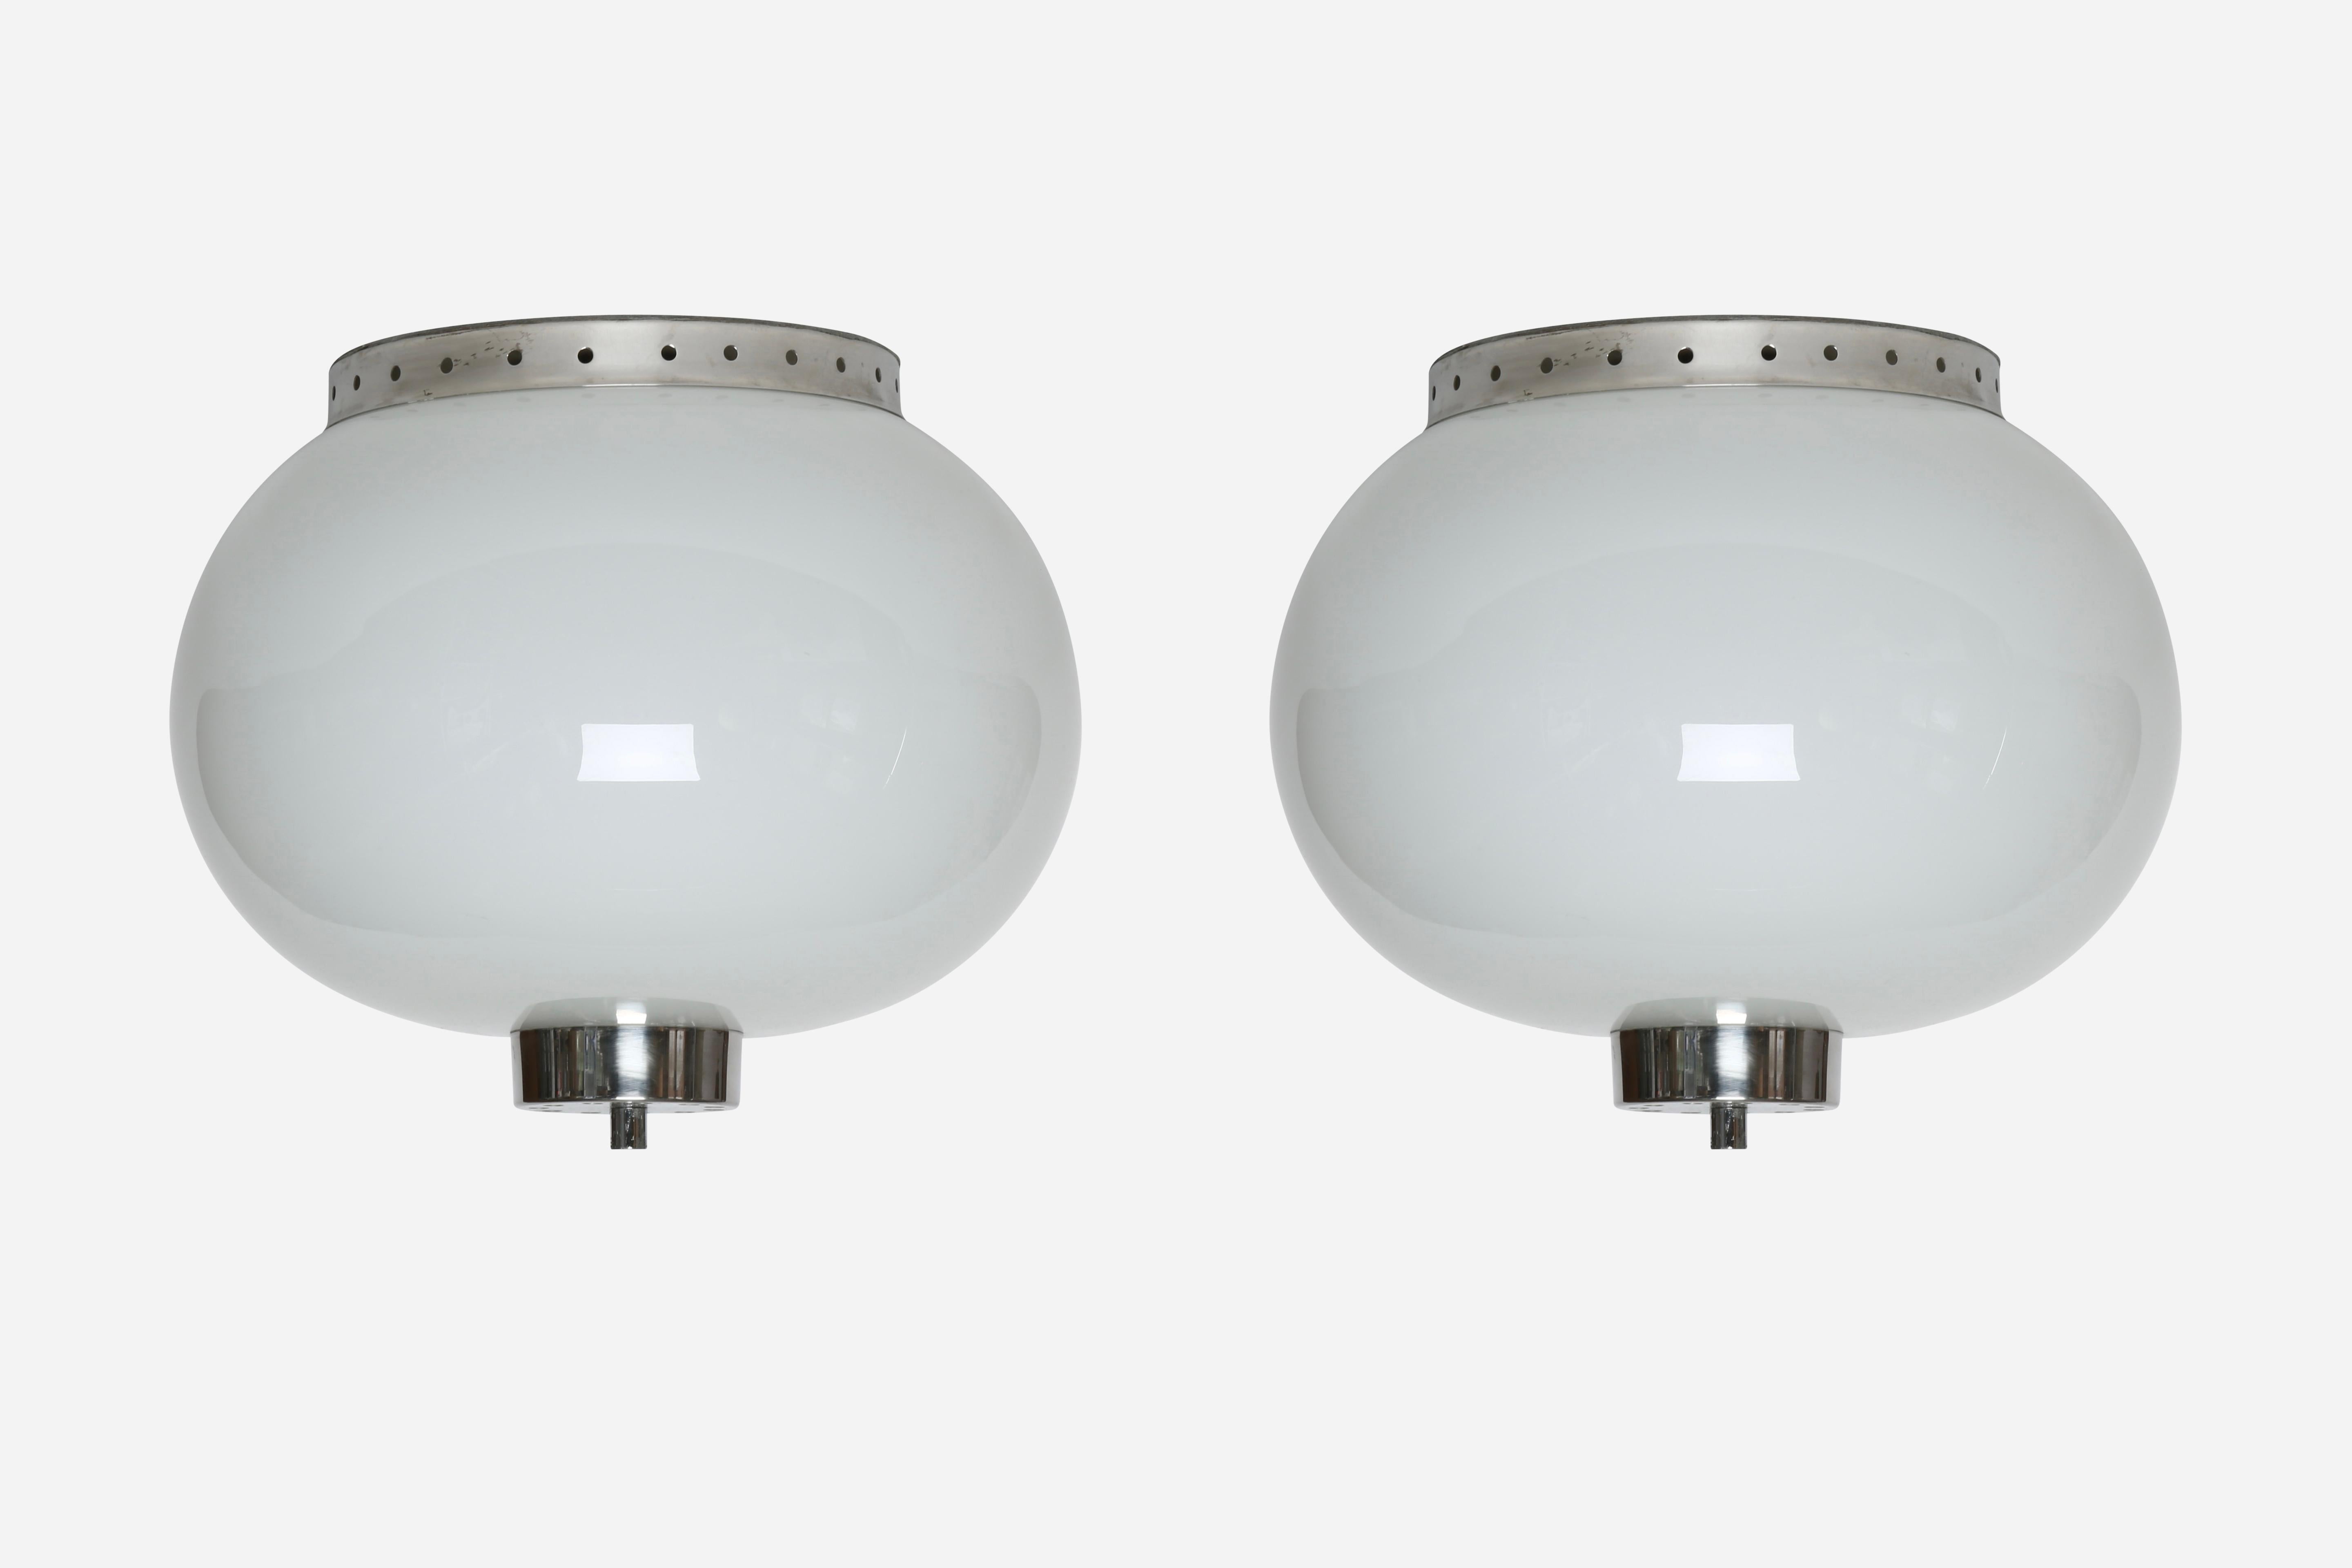 Stilnovo style flush mount ceiling lights, a pair
Made in Italy, 1960s
Opaline glass, chrome plated metal.
Take 3 candelabra bulbs each.
Complimentary US rewiring upon request.
Priced and sold as a pair.